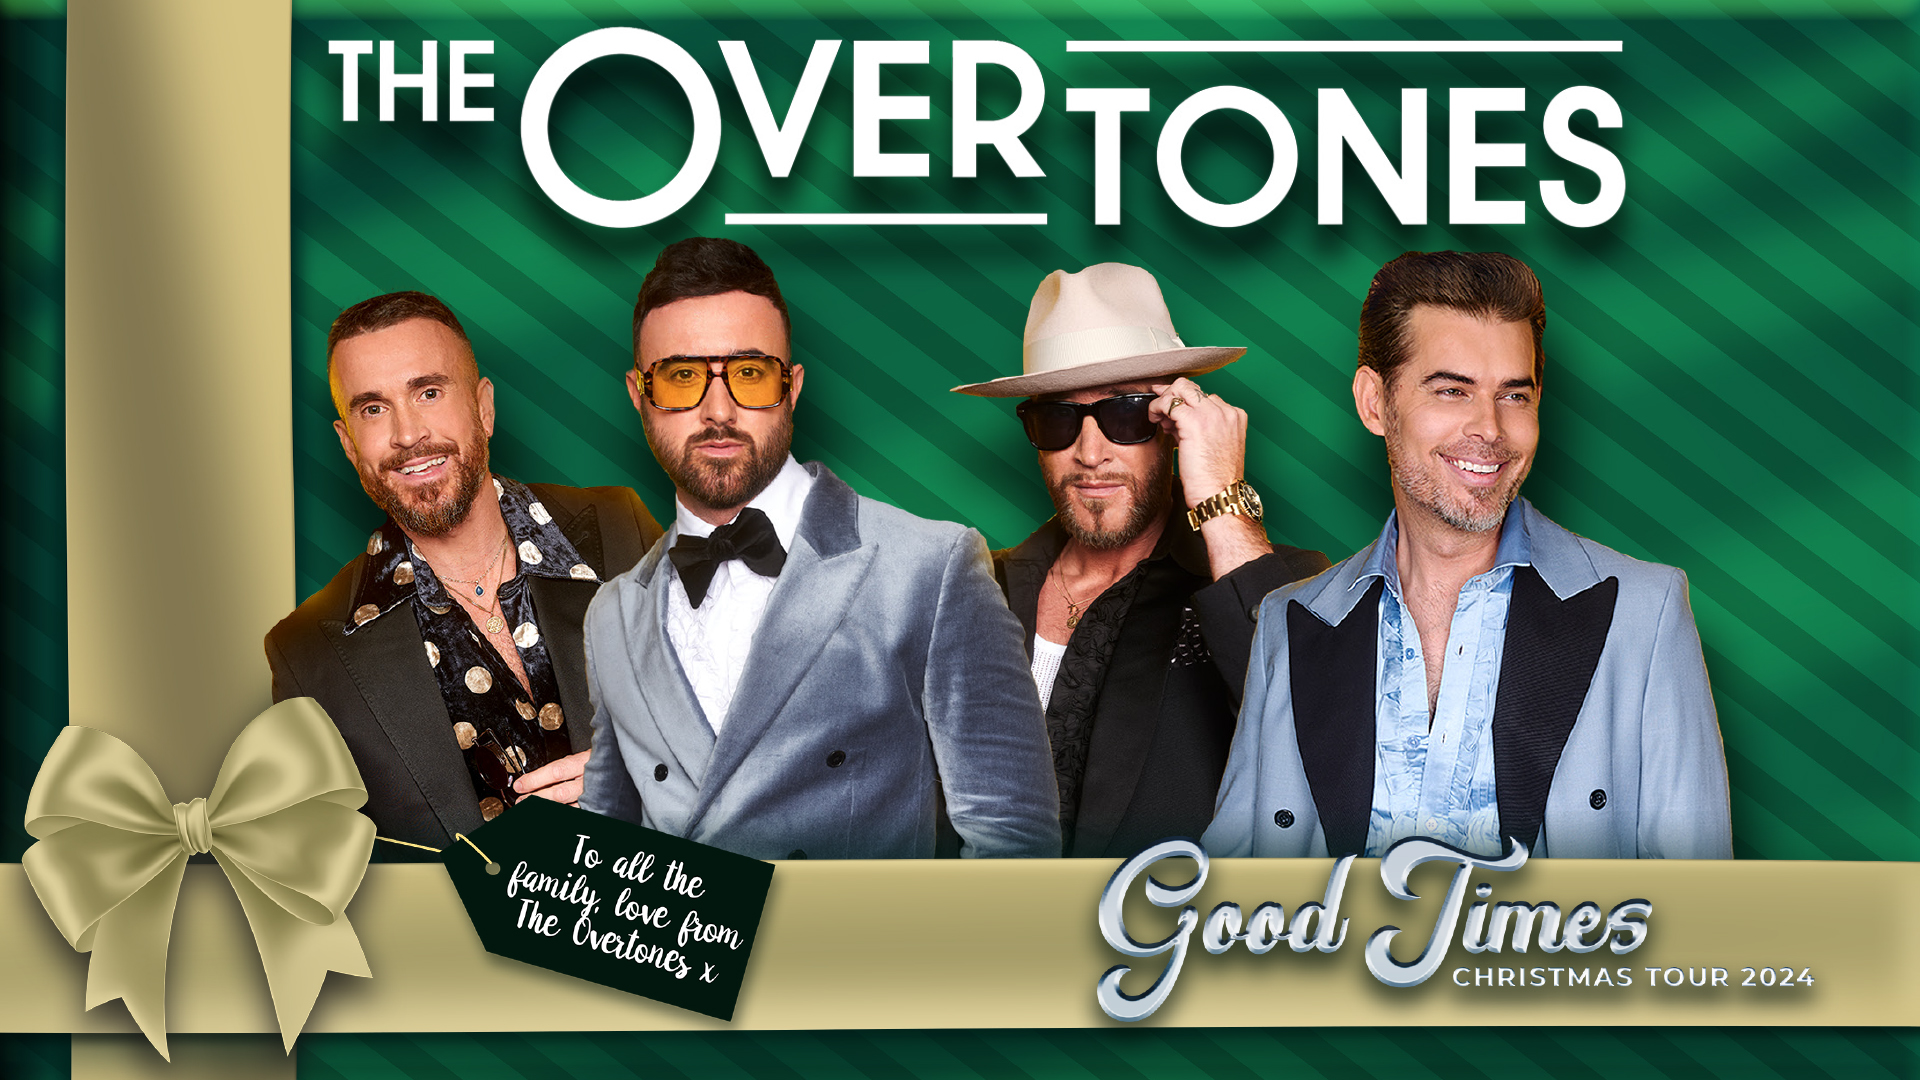 The Overtones: The Good Times Tour